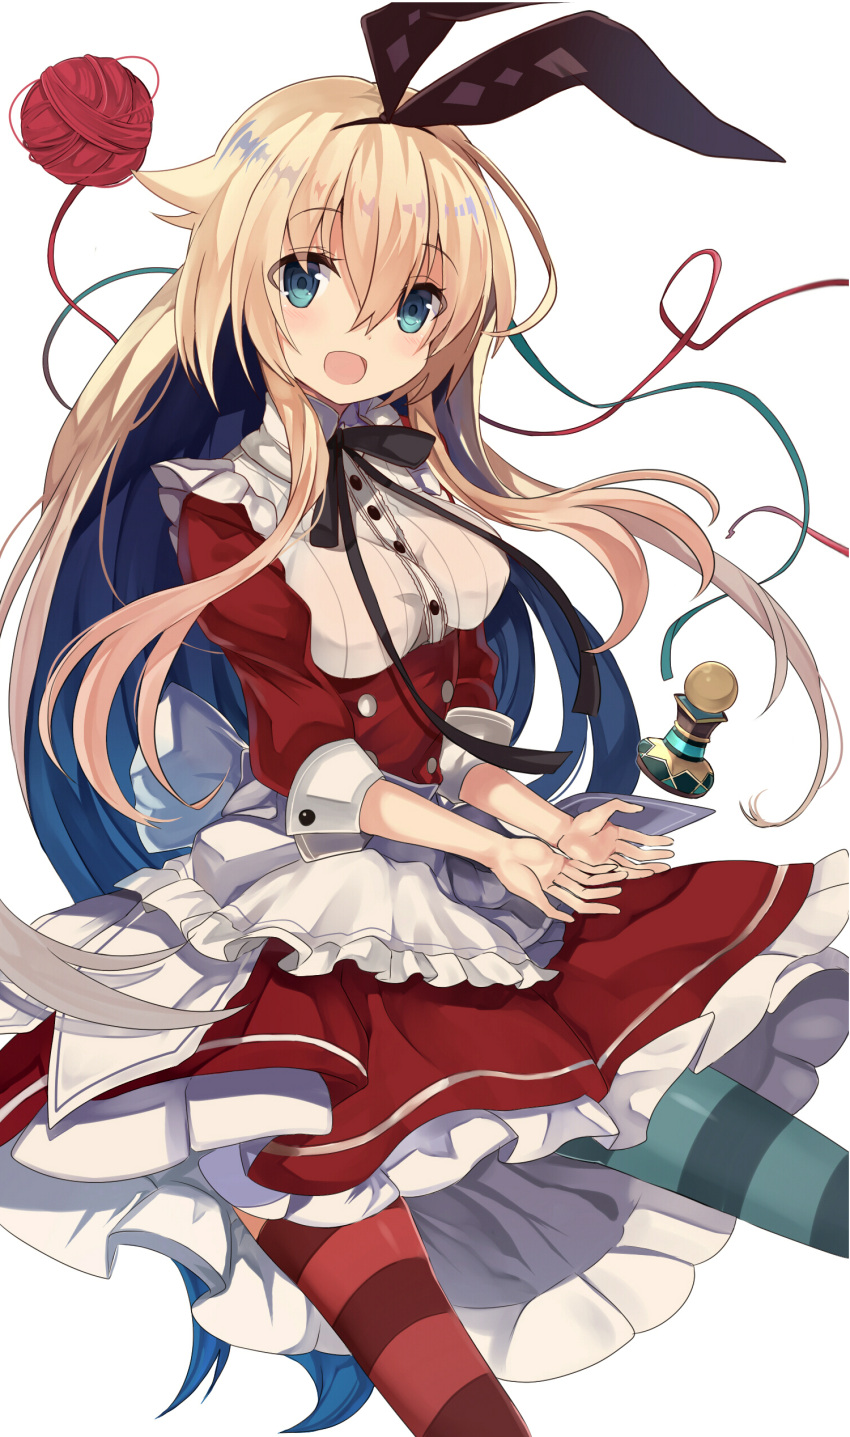 1girl absurdres alice_(grimms_notes) alice_(wonderland) alice_in_wonderland apron blonde_hair blue_eyes chess_piece dress green_legwear grimms_notes highres long_hair mismatched_legwear open_mouth red_dress red_legwear retsuto ribbon smile solo striped striped_legwear waist_apron yarn yarn_ball